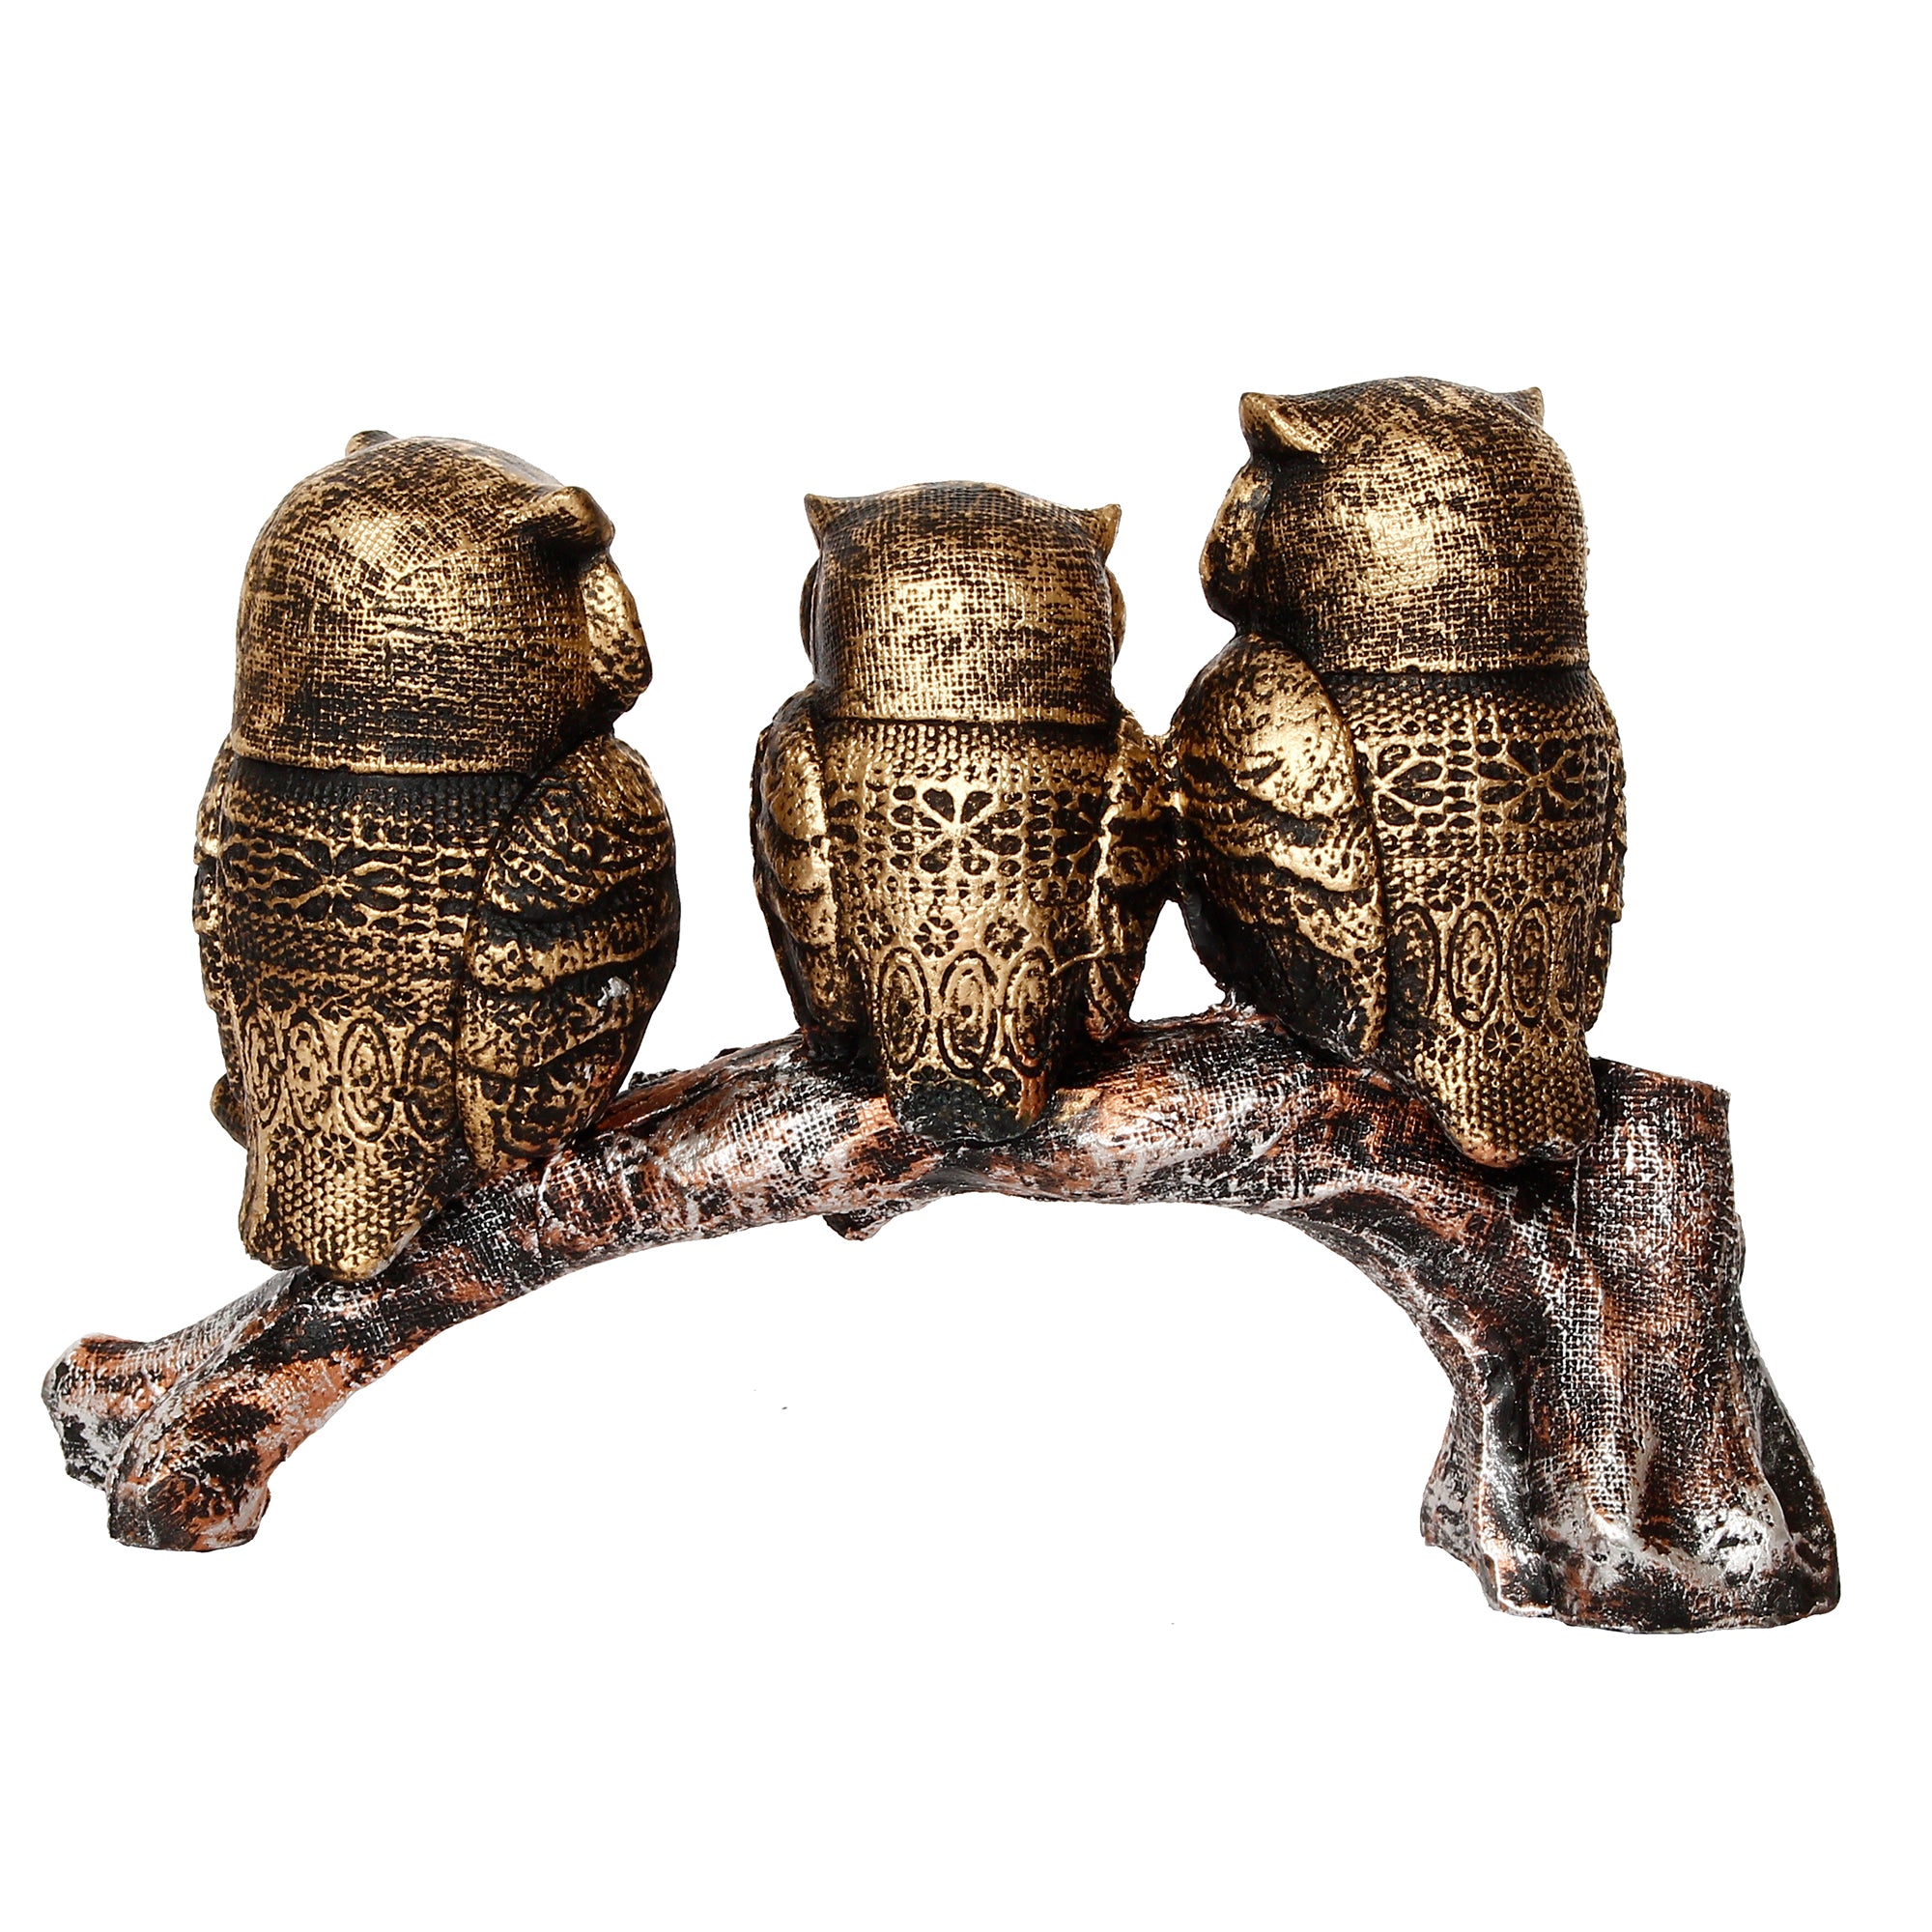 3 Owl Sitting on Branch Antique Finish Handcrafted Polyresin Decorative Showpiece 6